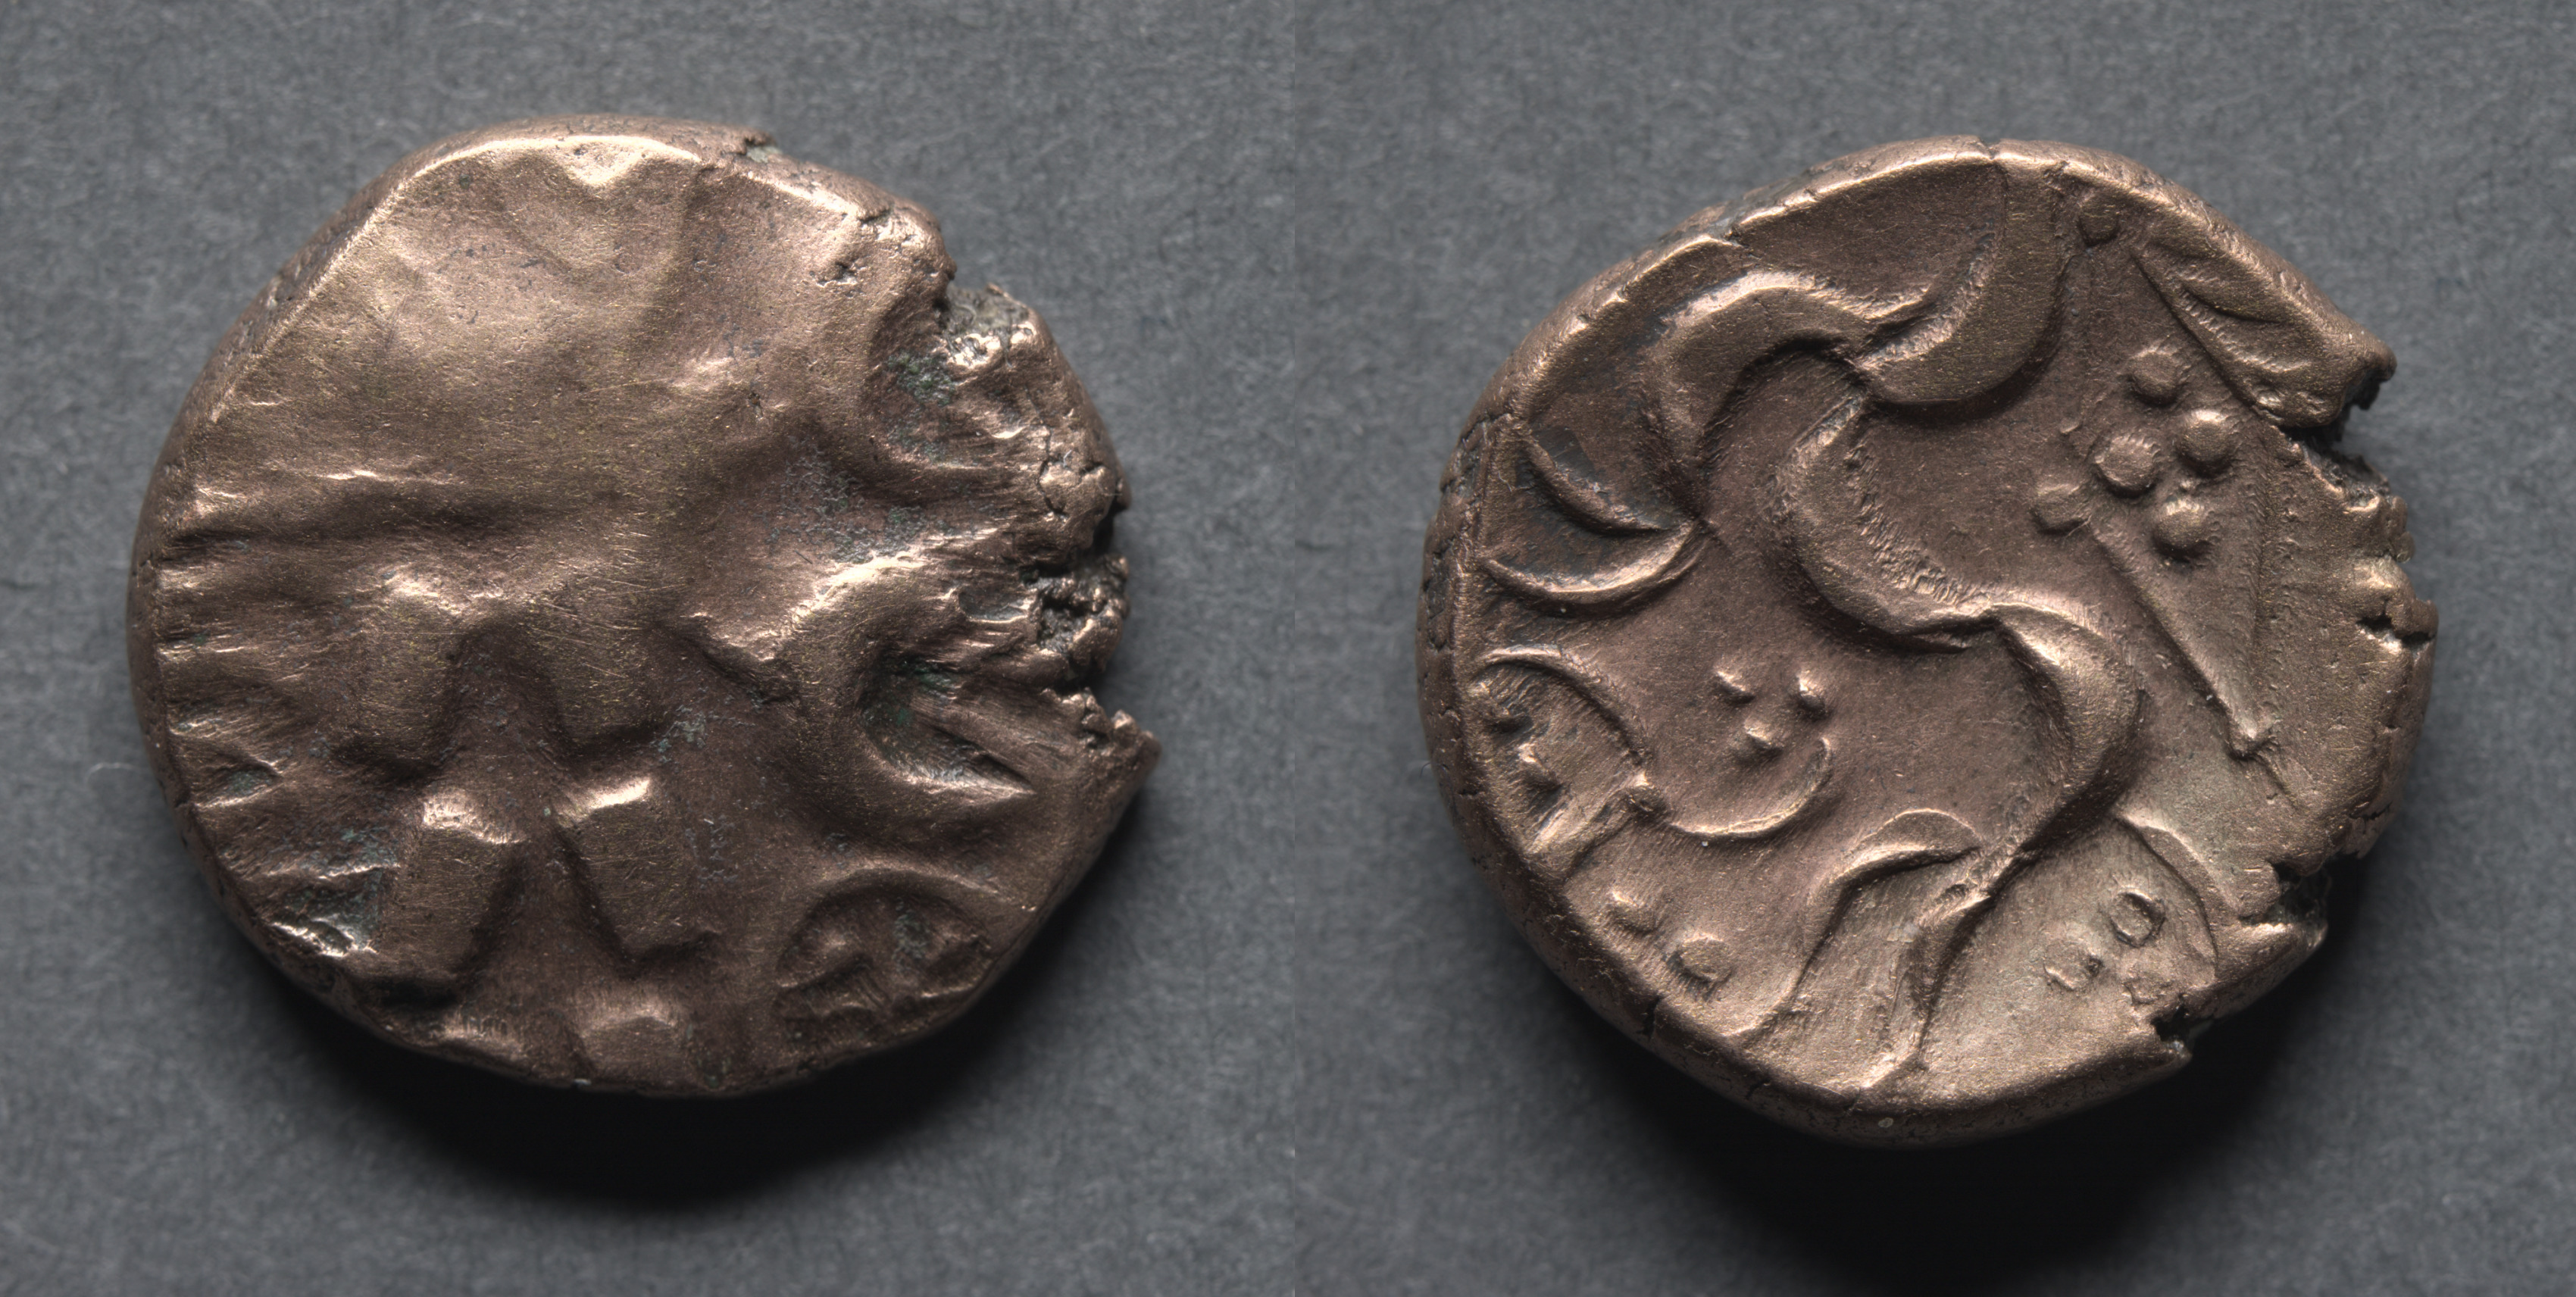 Stater: Wreath, Crescents, and Wheel (obverse); Horse and Diamond (reverse)